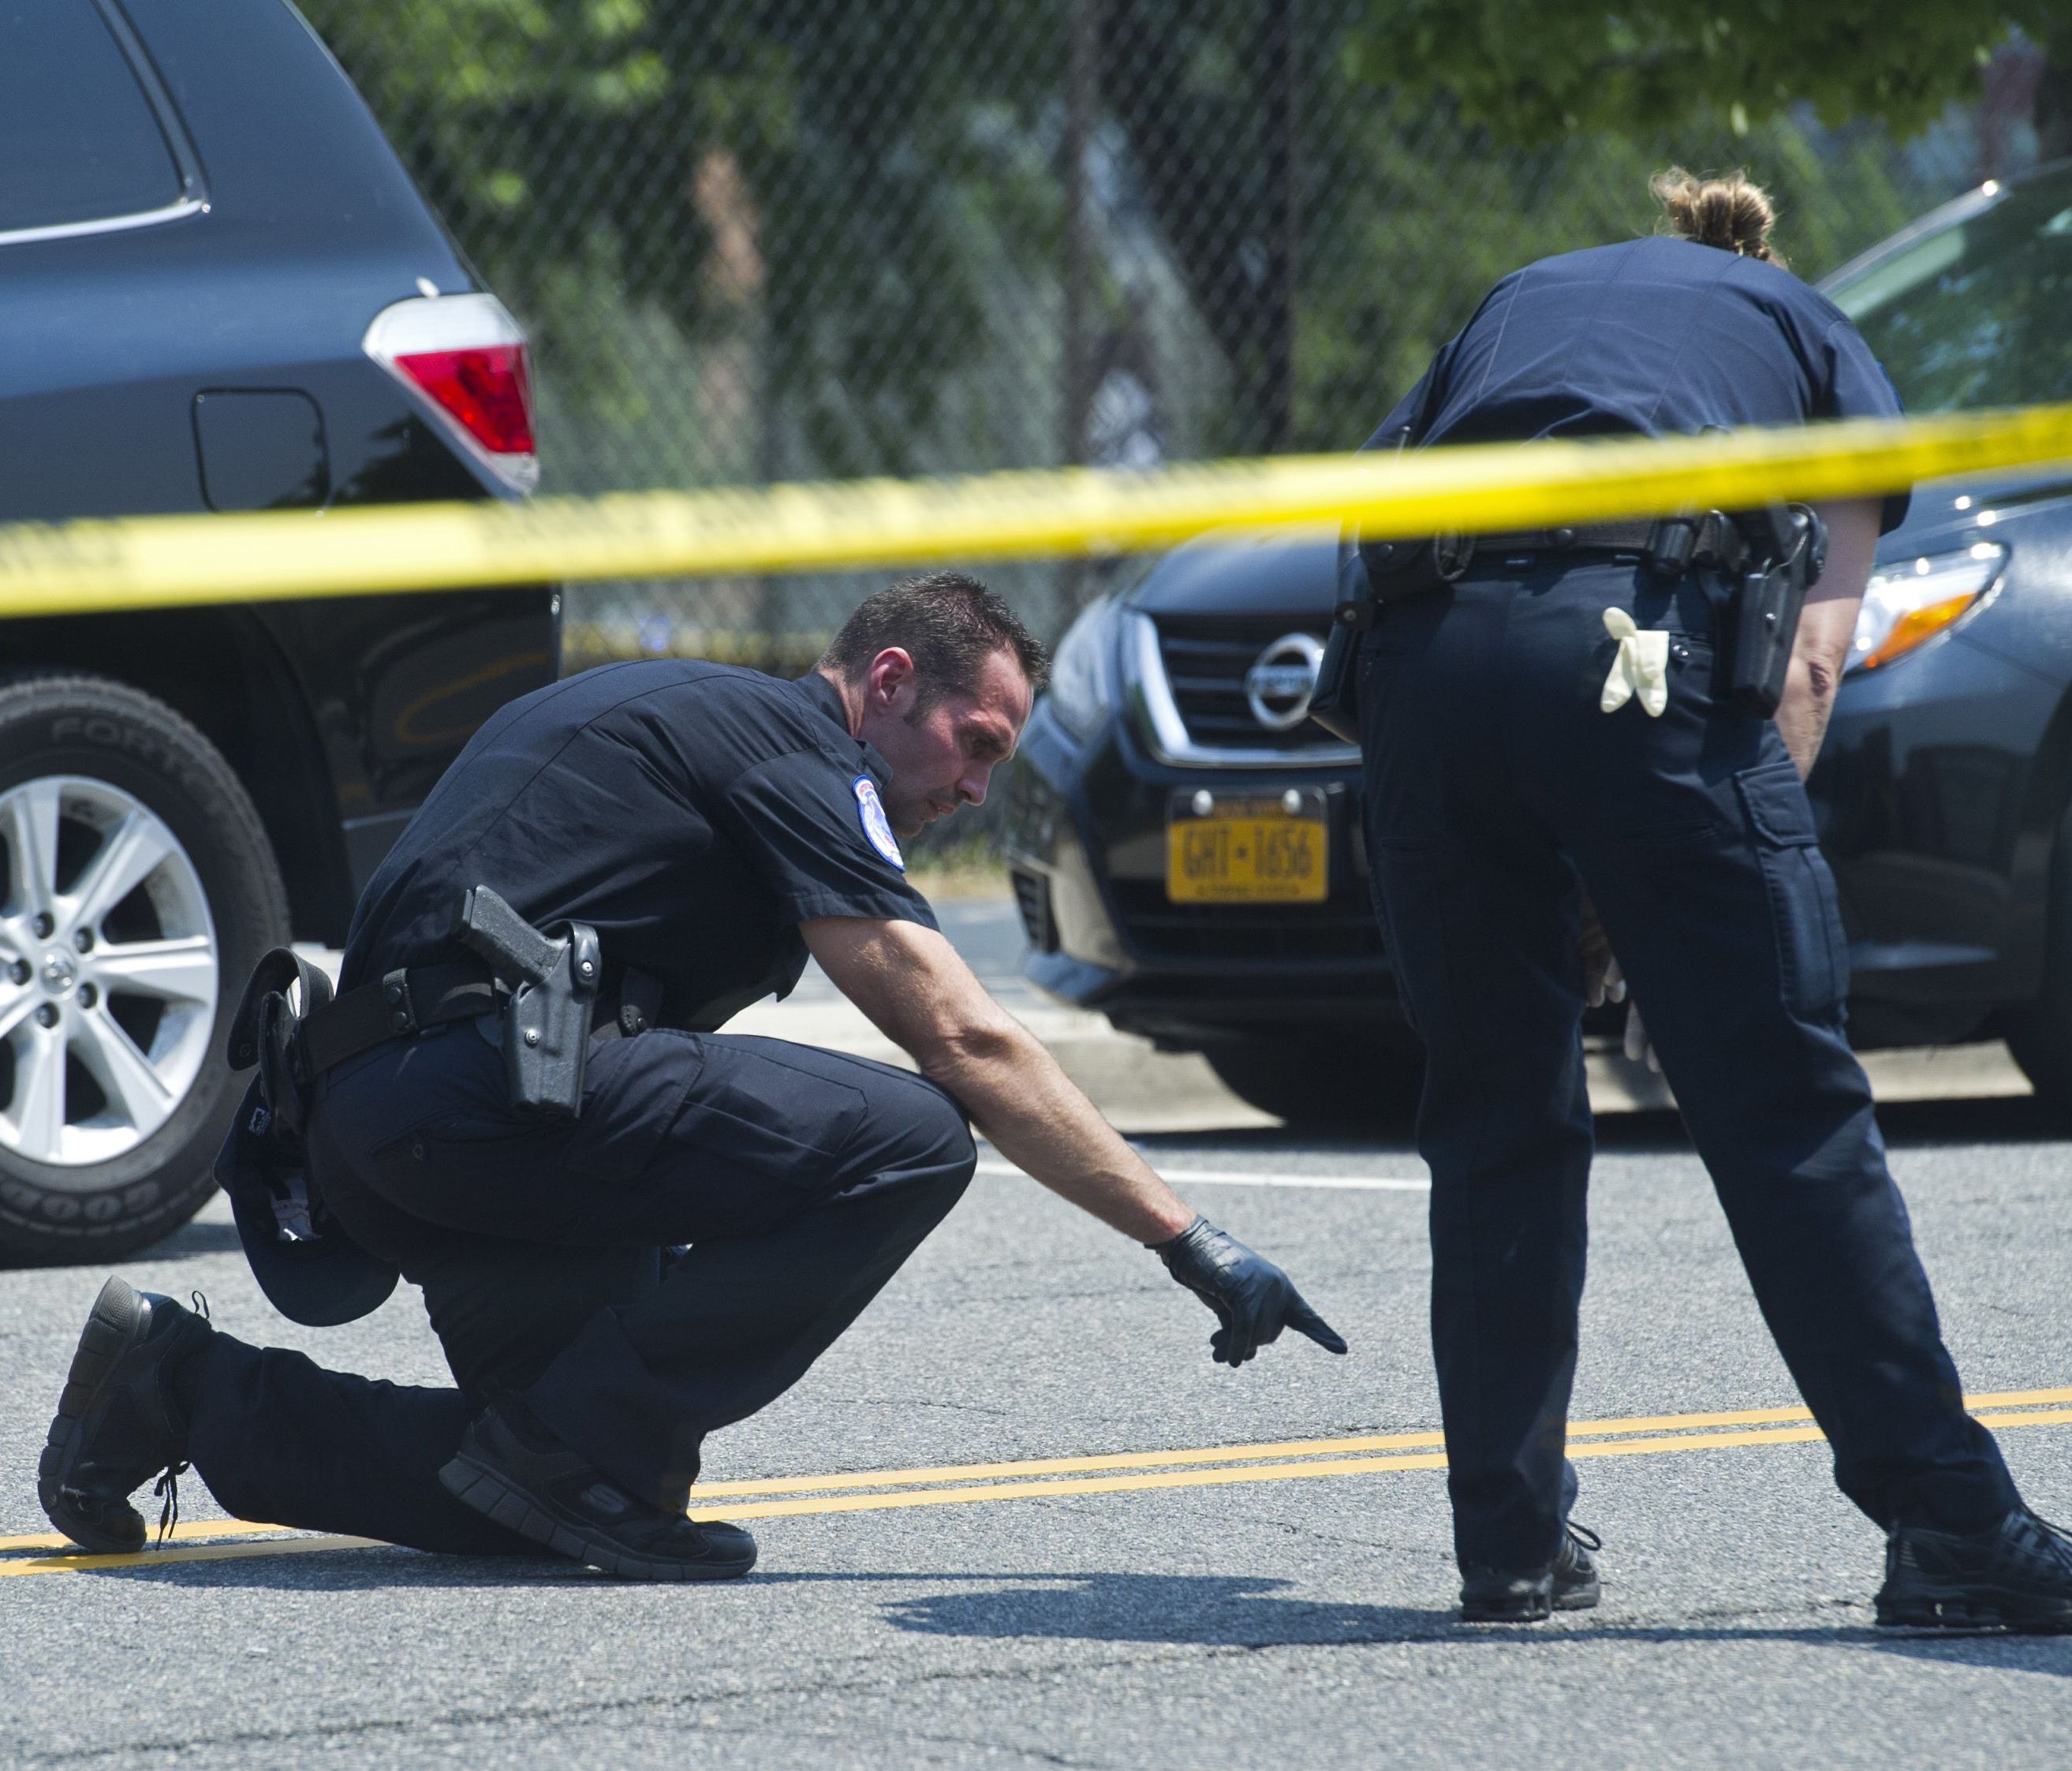 Crime scene investigators search for evidence at the scene of the shooting in Alexandria, Va., on June 14, 2017, where House Majority Whip Steve Scalise and others were shot during a congressional baseball practice.